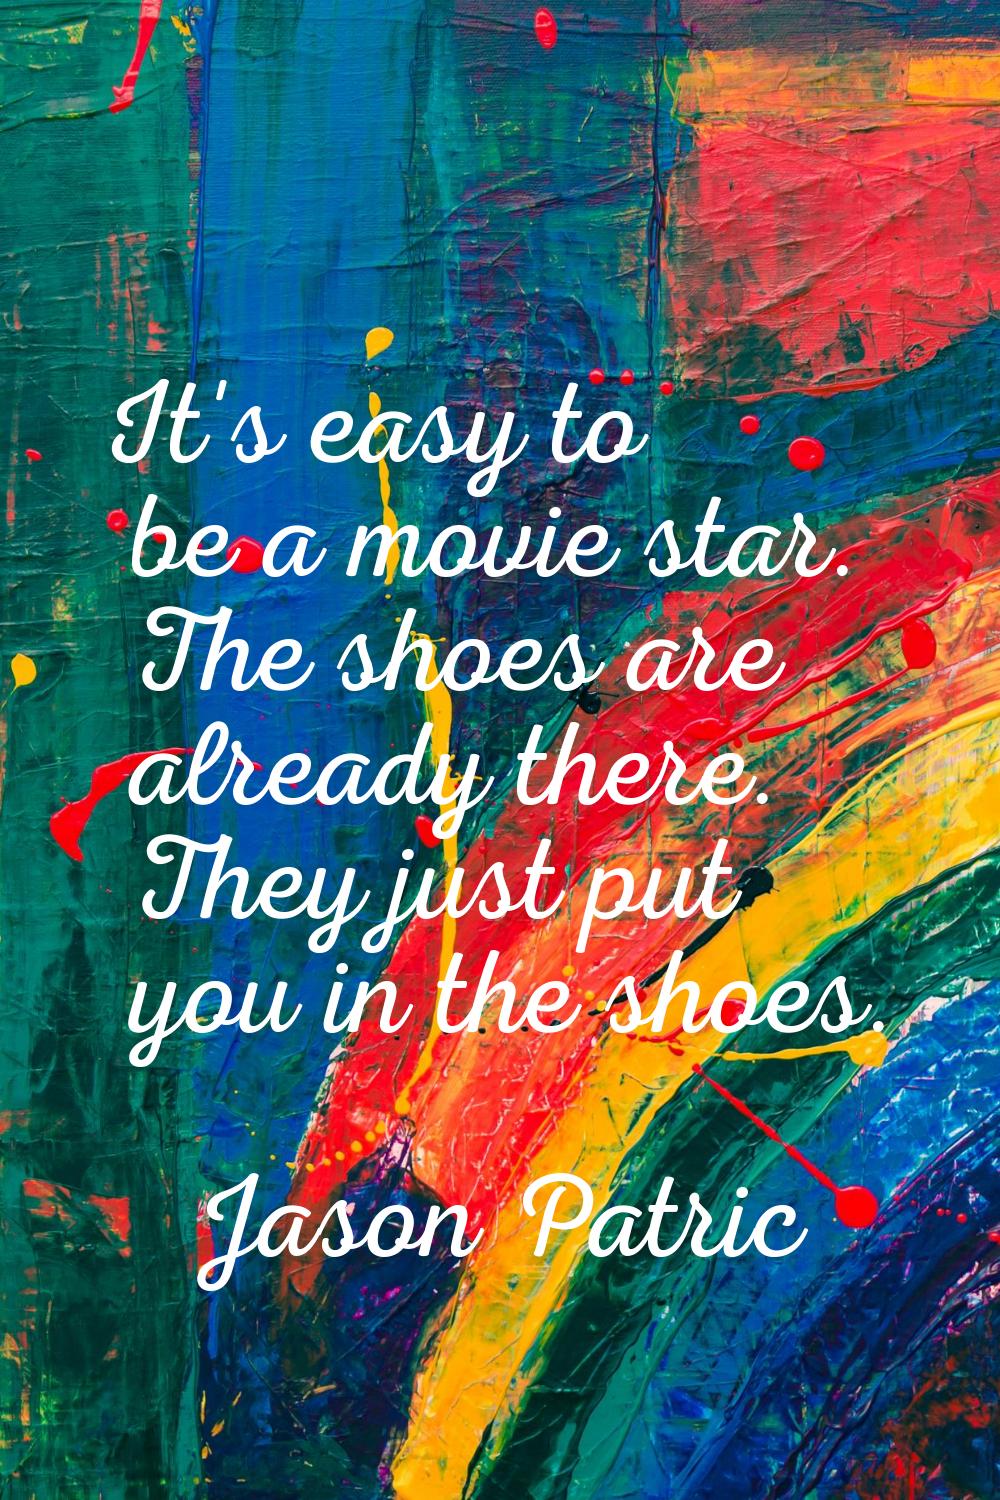 It's easy to be a movie star. The shoes are already there. They just put you in the shoes.